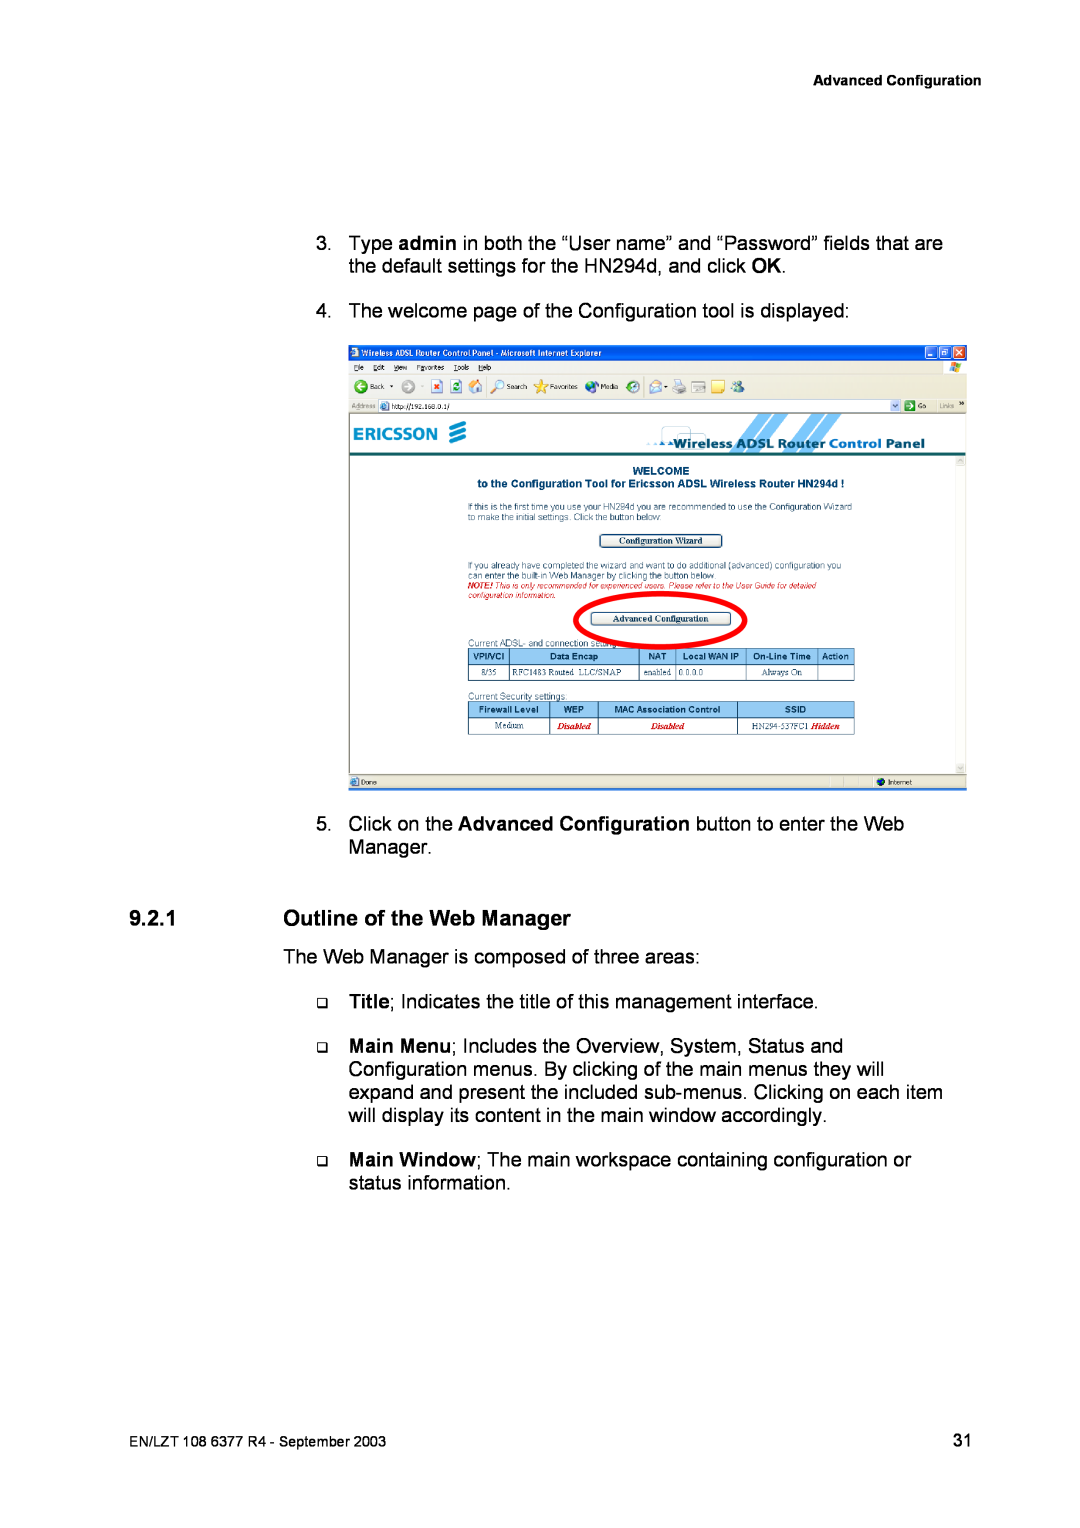 Garmin HN294DP/DI manual Outline of the Web Manager 